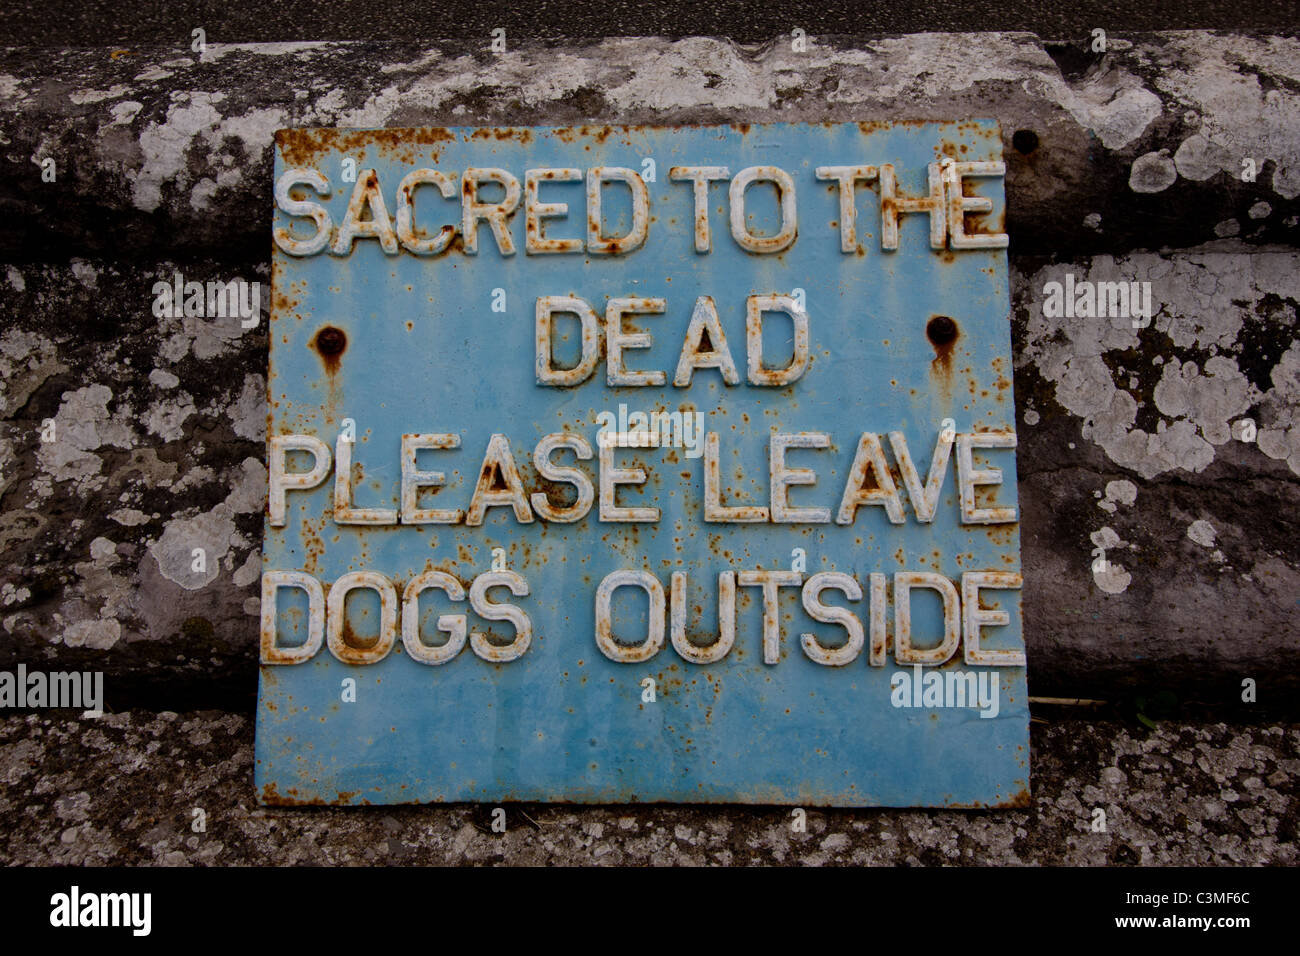 Sacred to the dead - please leave dogs outside Stock Photo